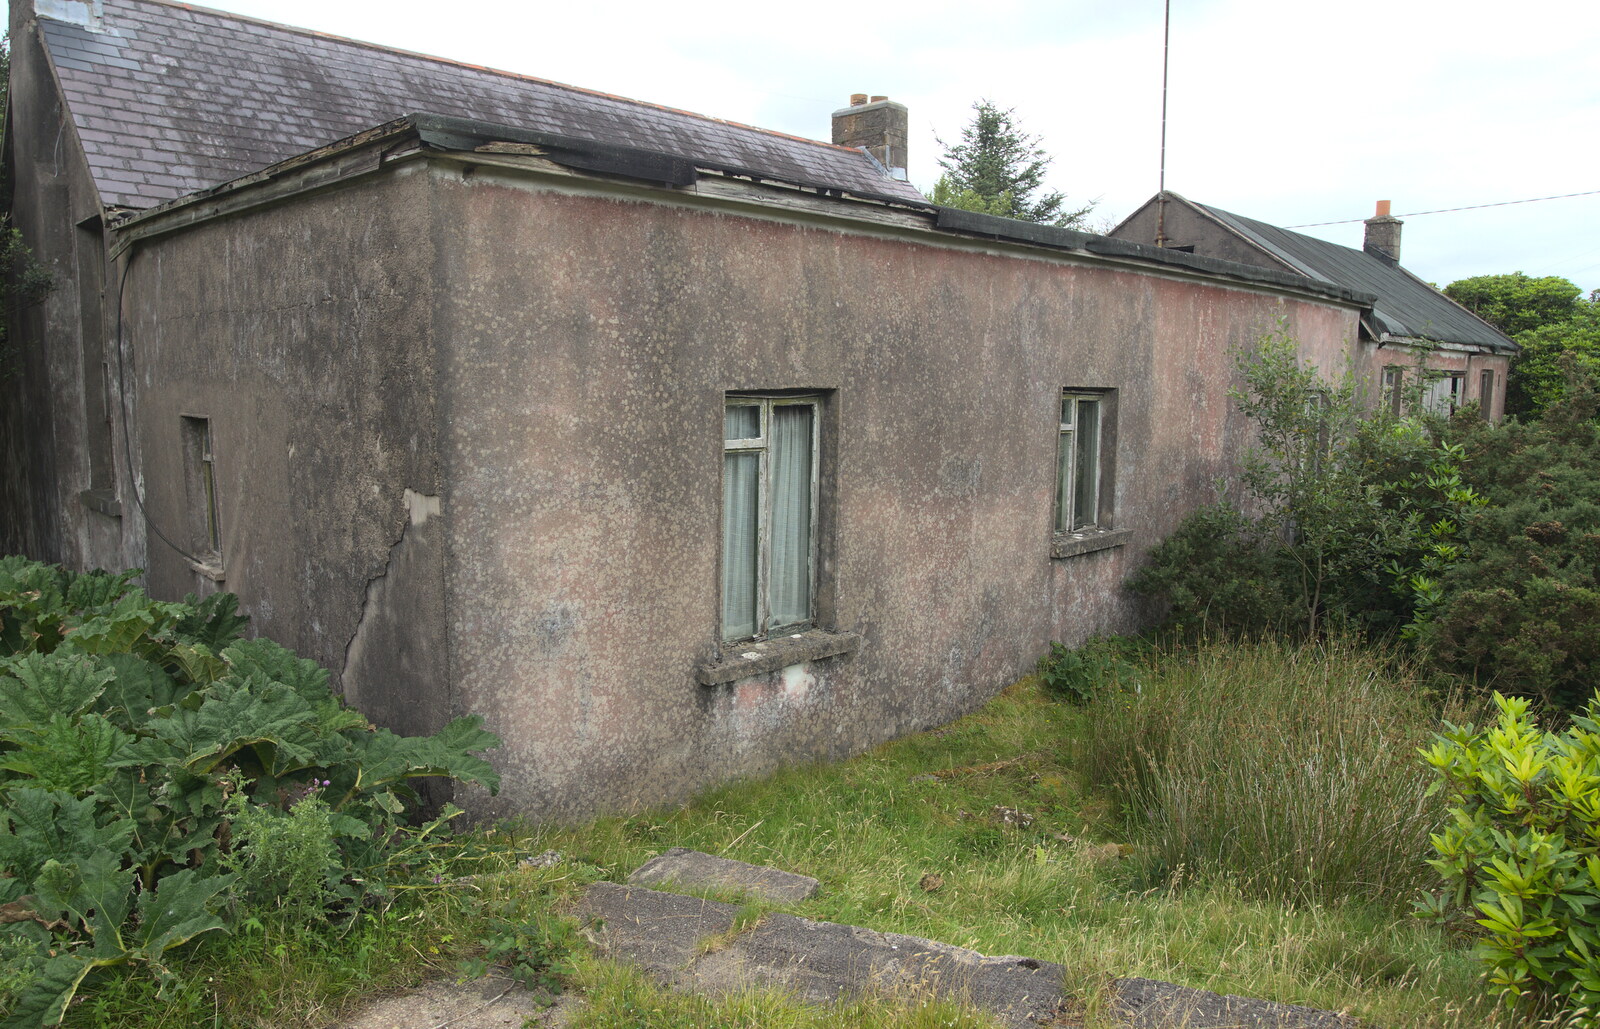 The back of the derelict school from From Achill to Strokestown, Mayo and Roscommon, Ireland - 10th August 2017